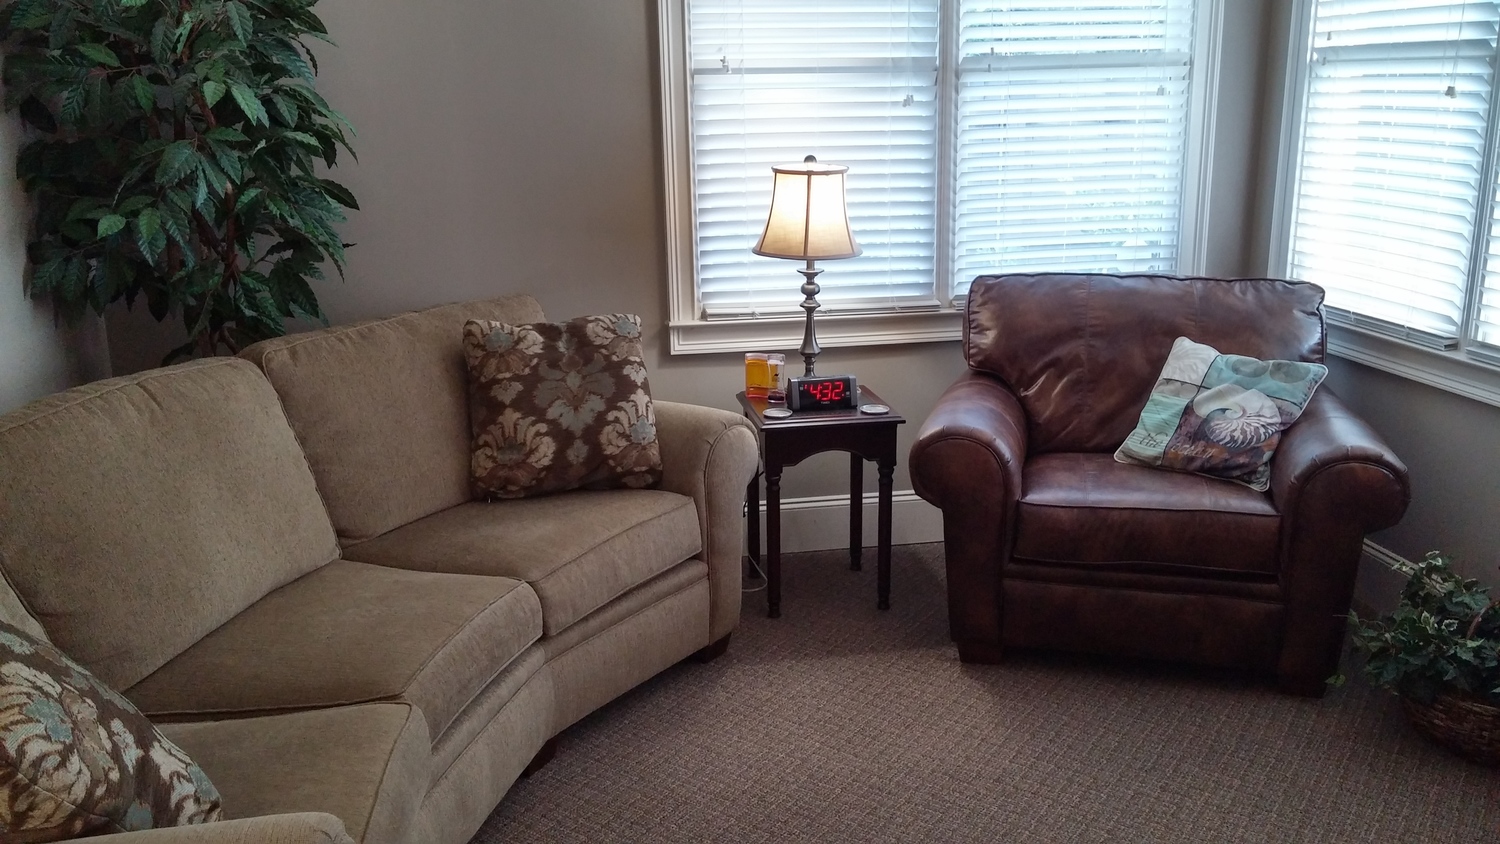 Gallery Photo of Family Therapy Room